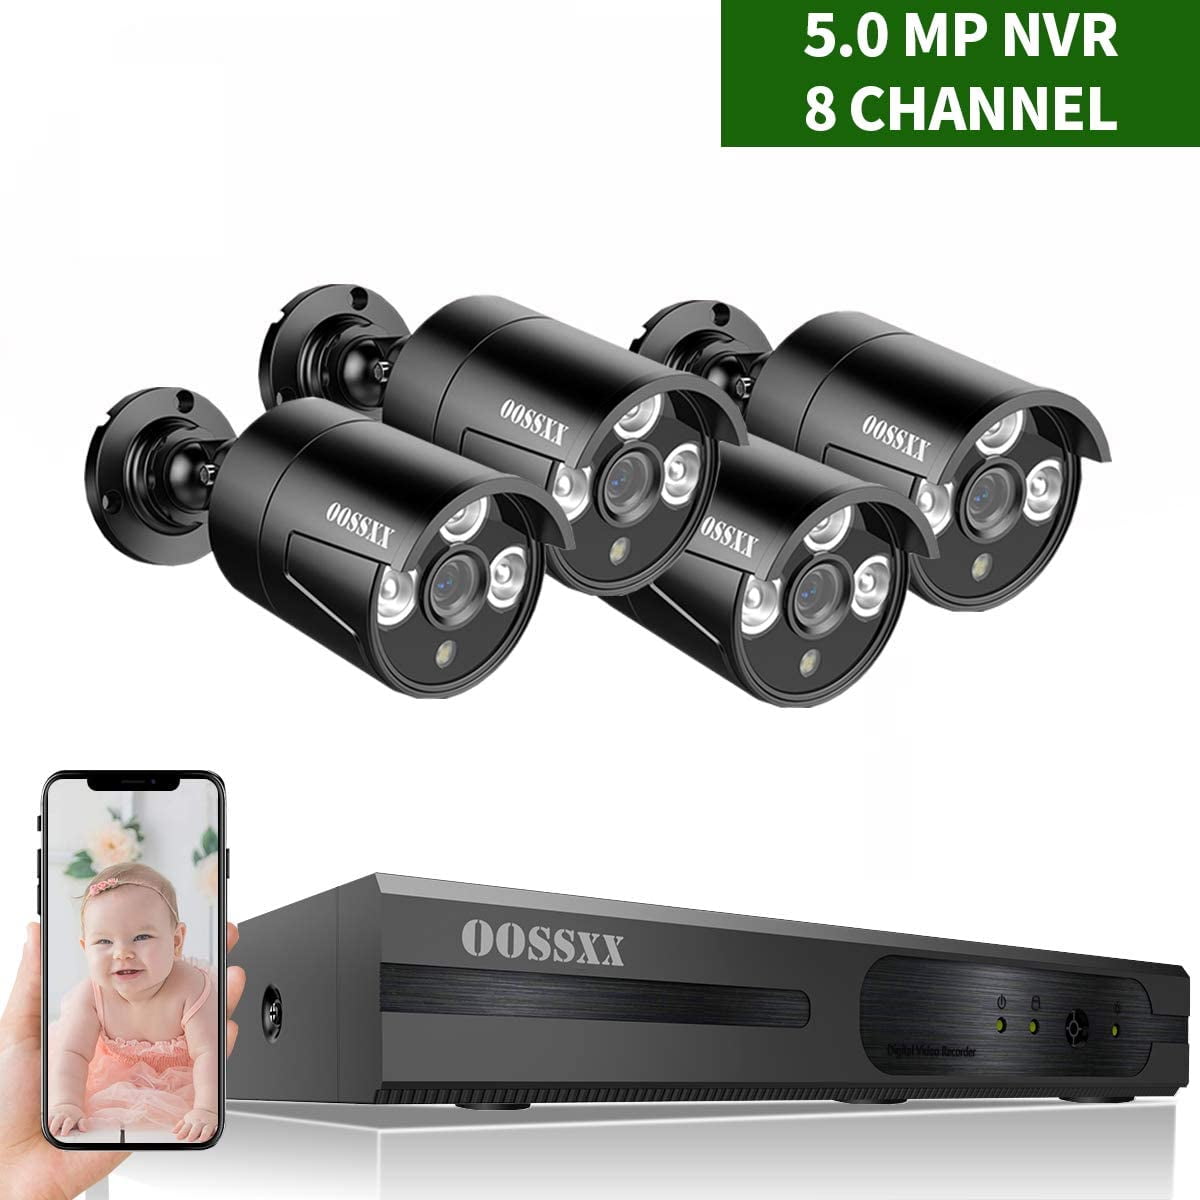 oossxx professional video security system